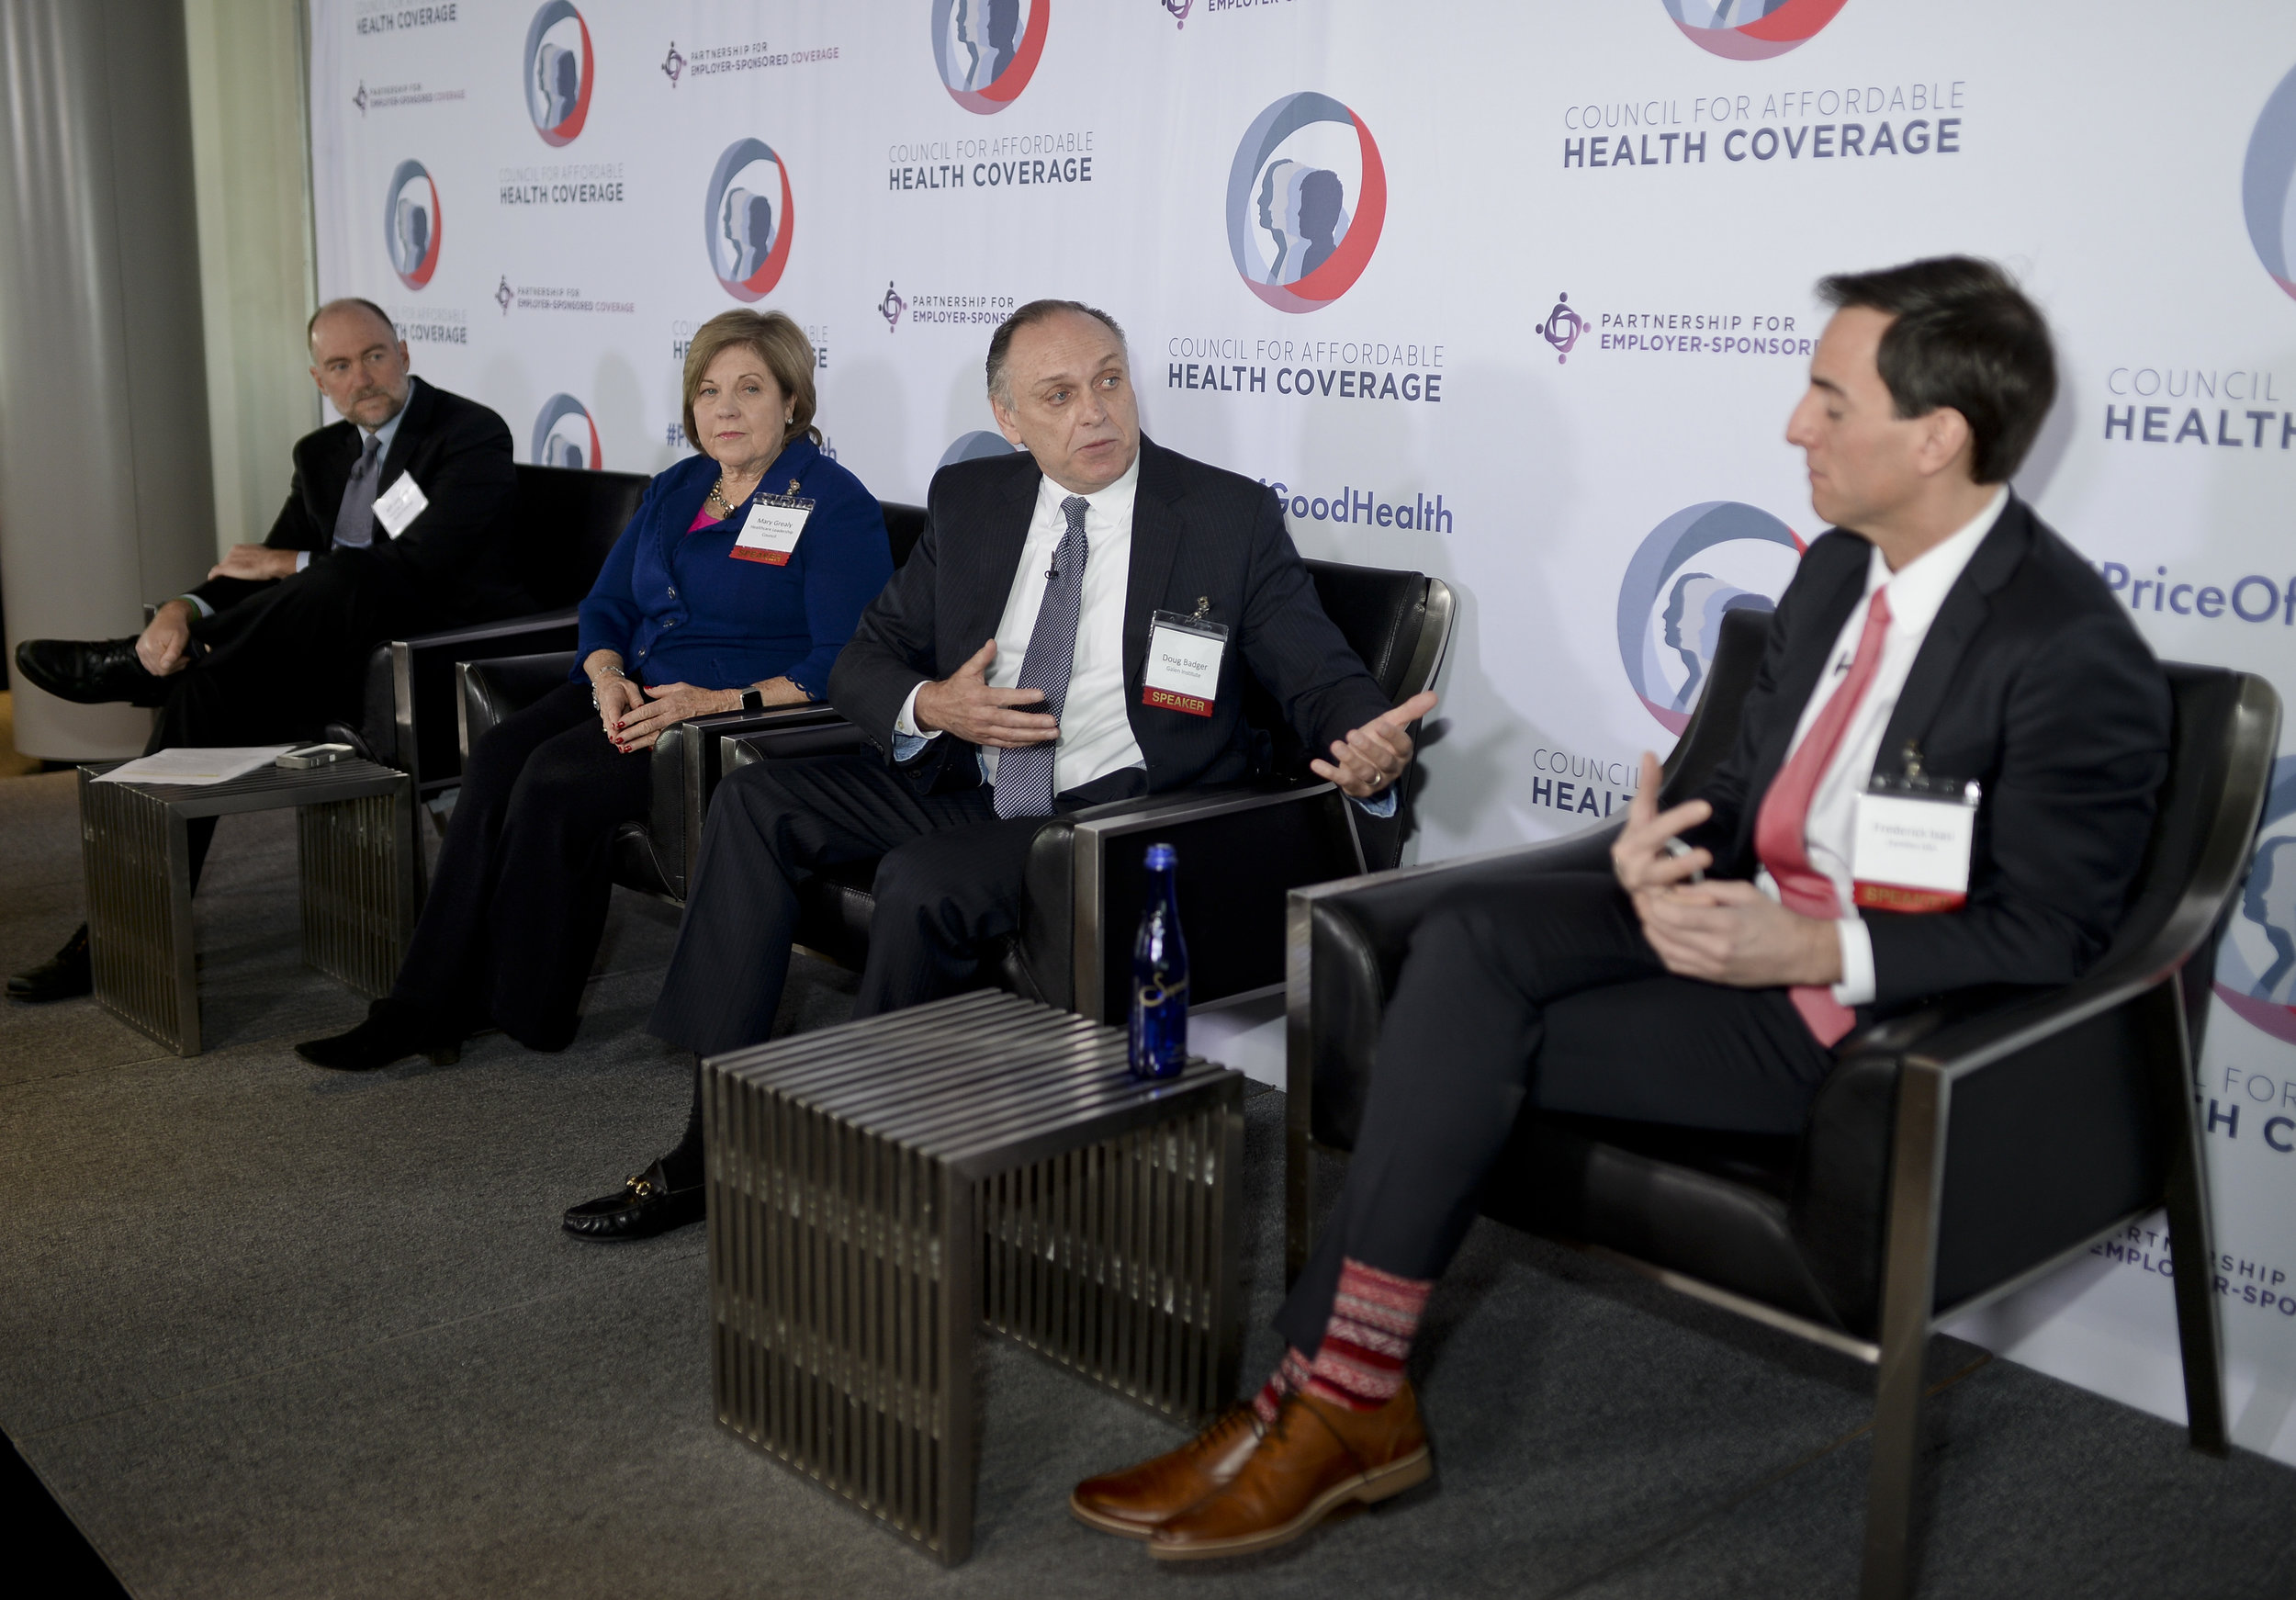 L-R: CAHC Chief Economist Jeff Lemieux, Healthcare Leadership Council President Mary R. Grealy, Galen Institute Senior Fellow Doug Badger, and Families USA Executive Director Frederick Isasi